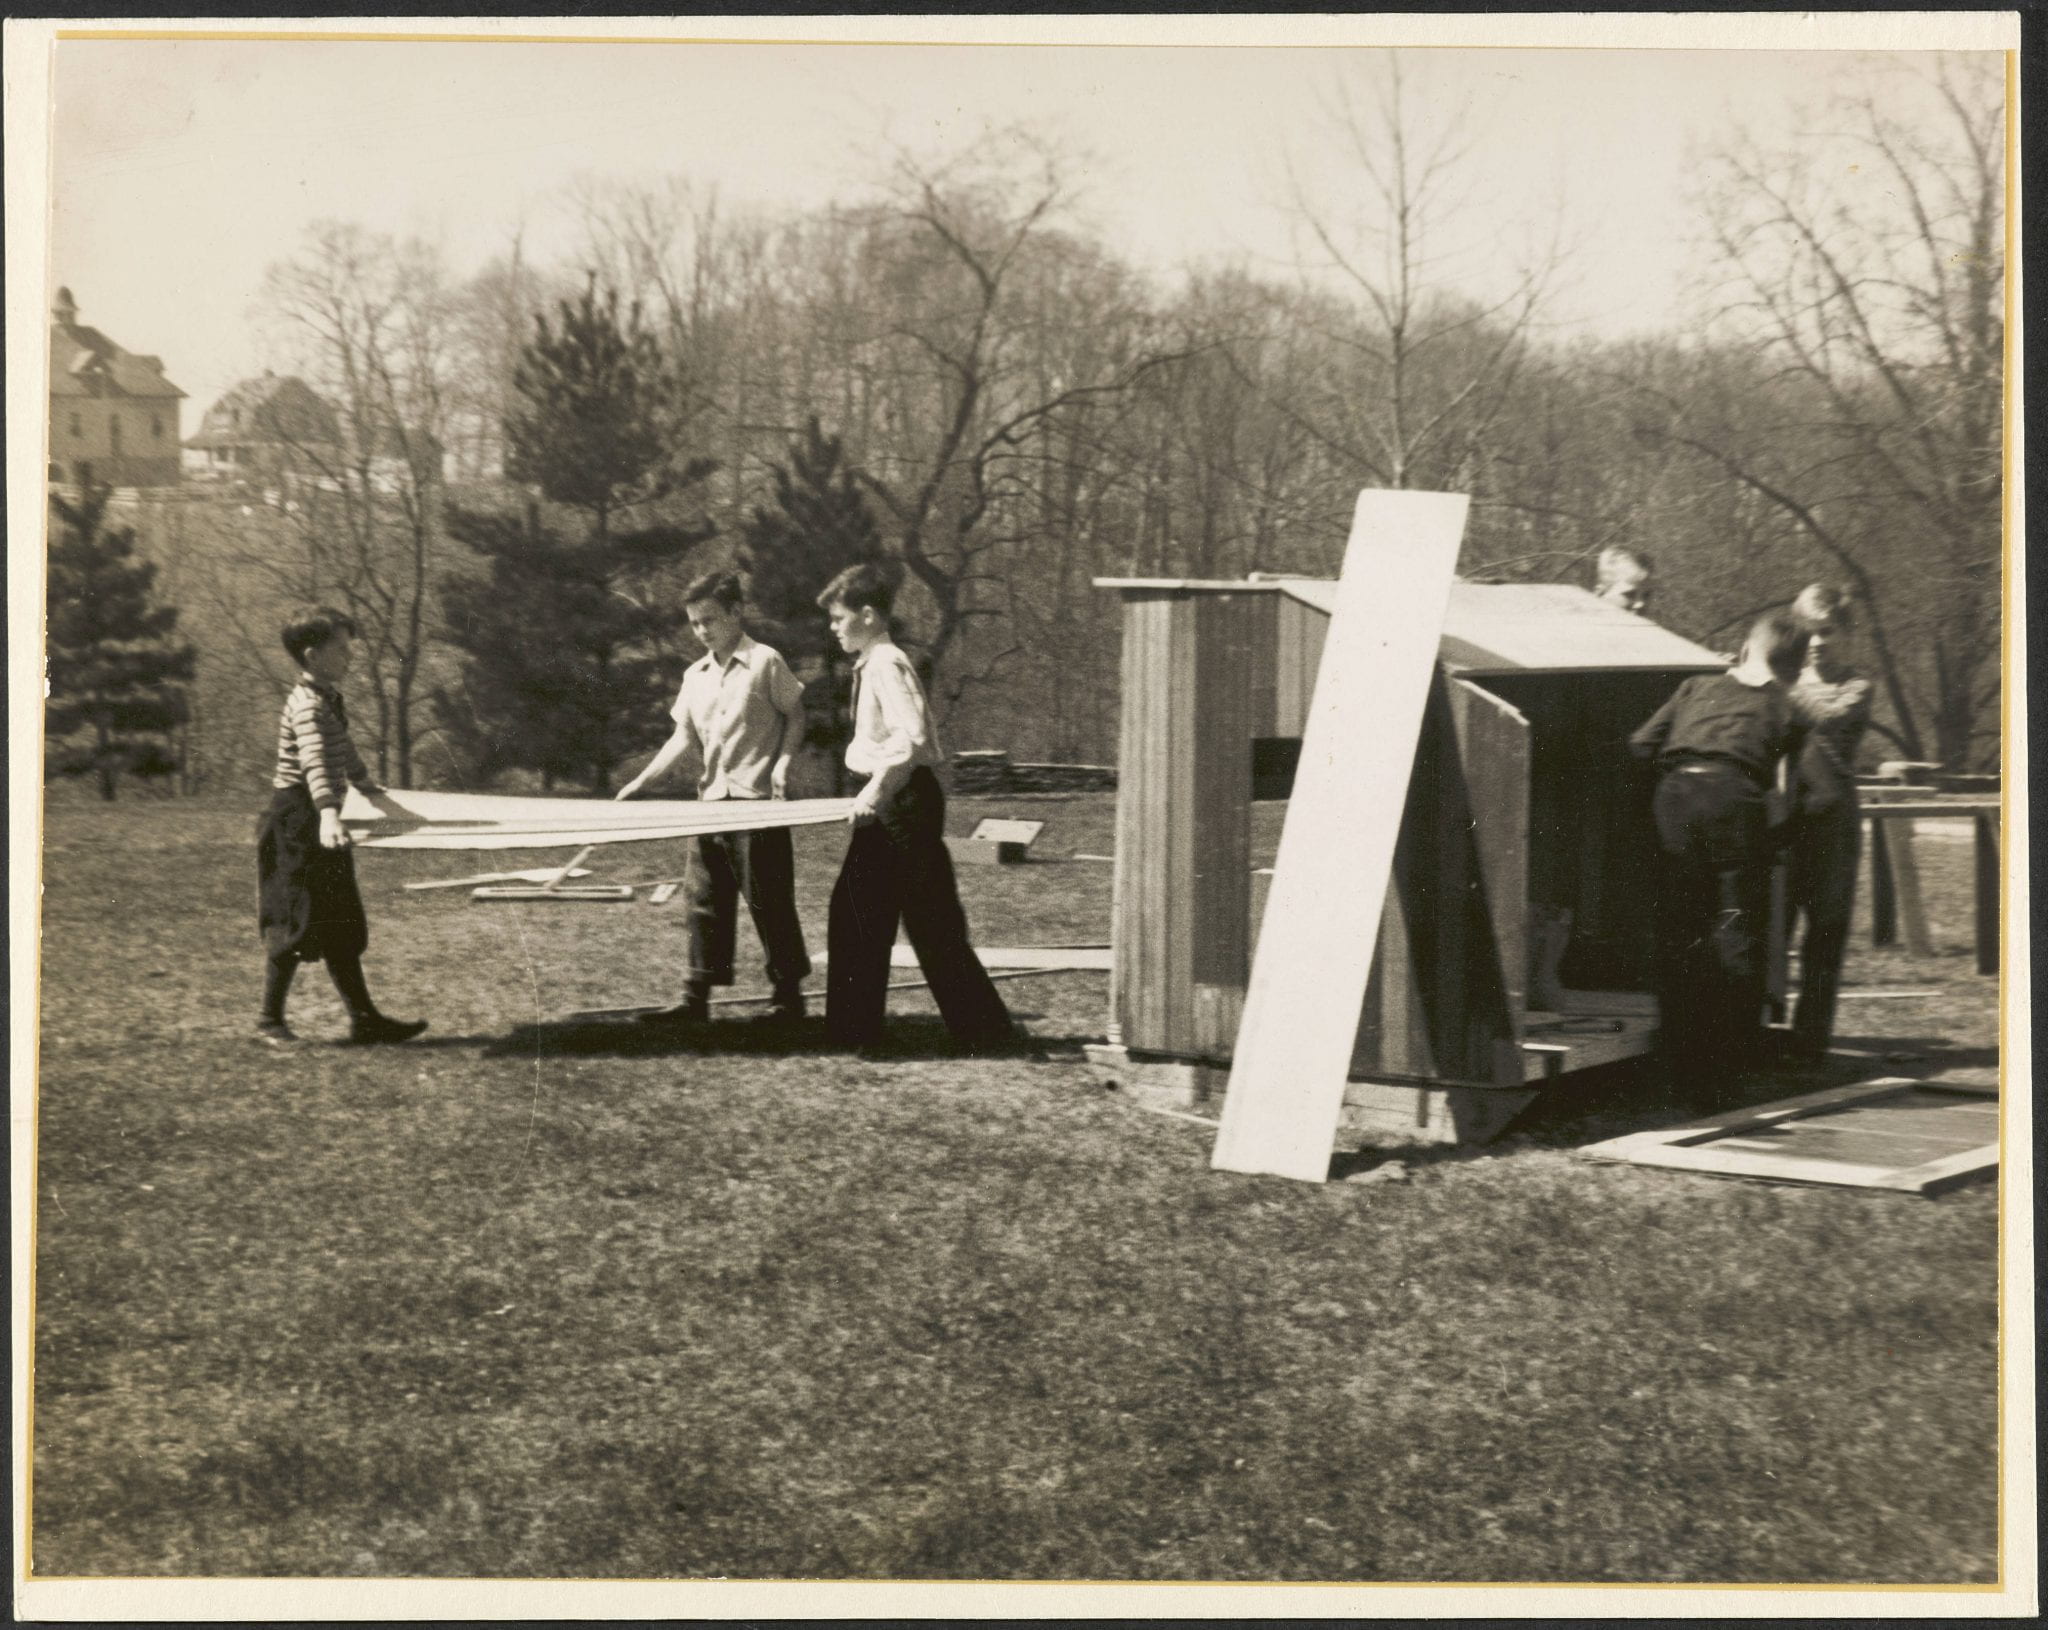 1930s students building a chicken coop.